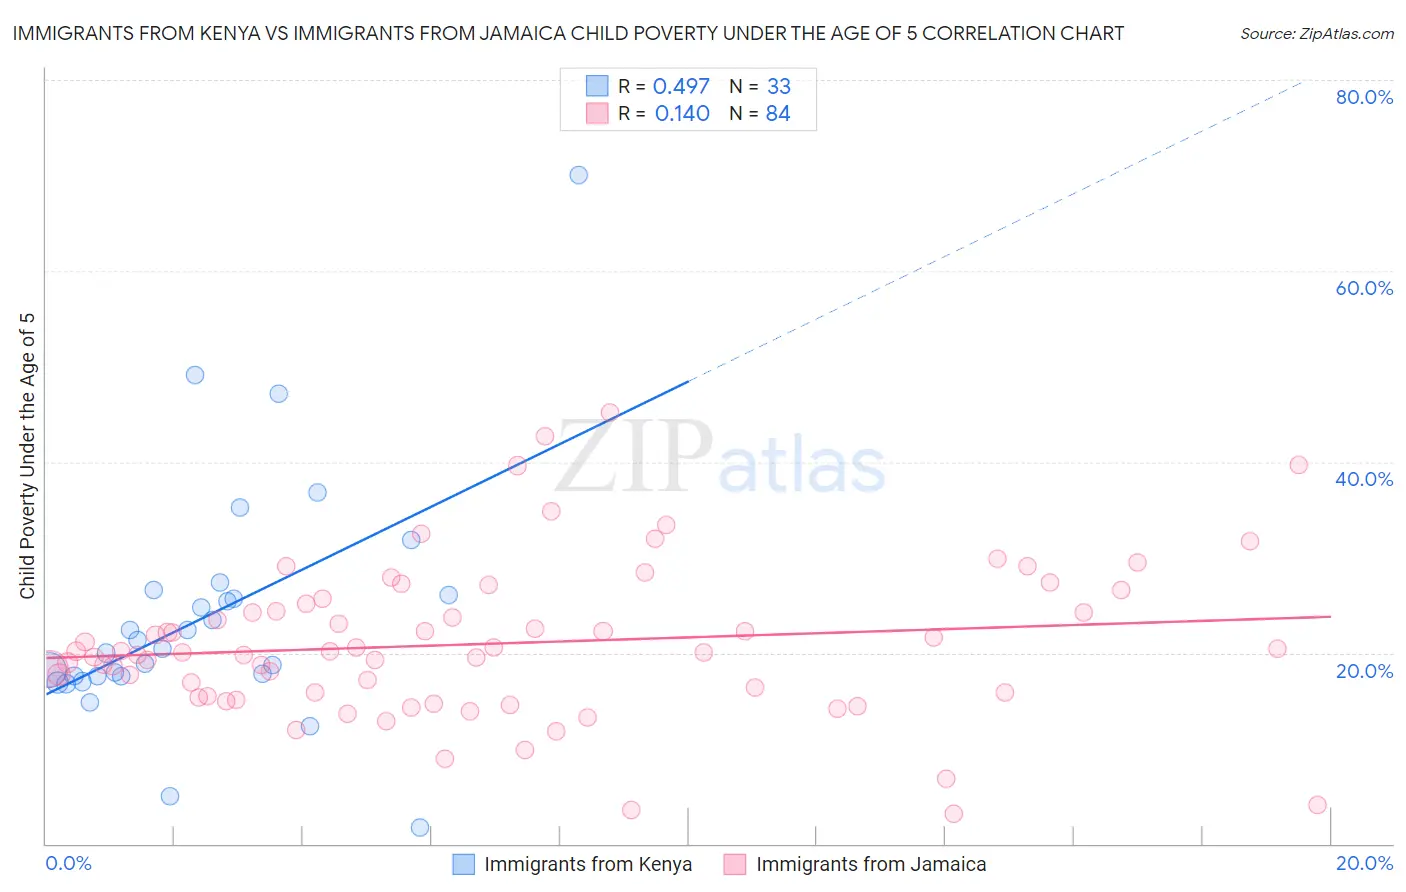 Immigrants from Kenya vs Immigrants from Jamaica Child Poverty Under the Age of 5